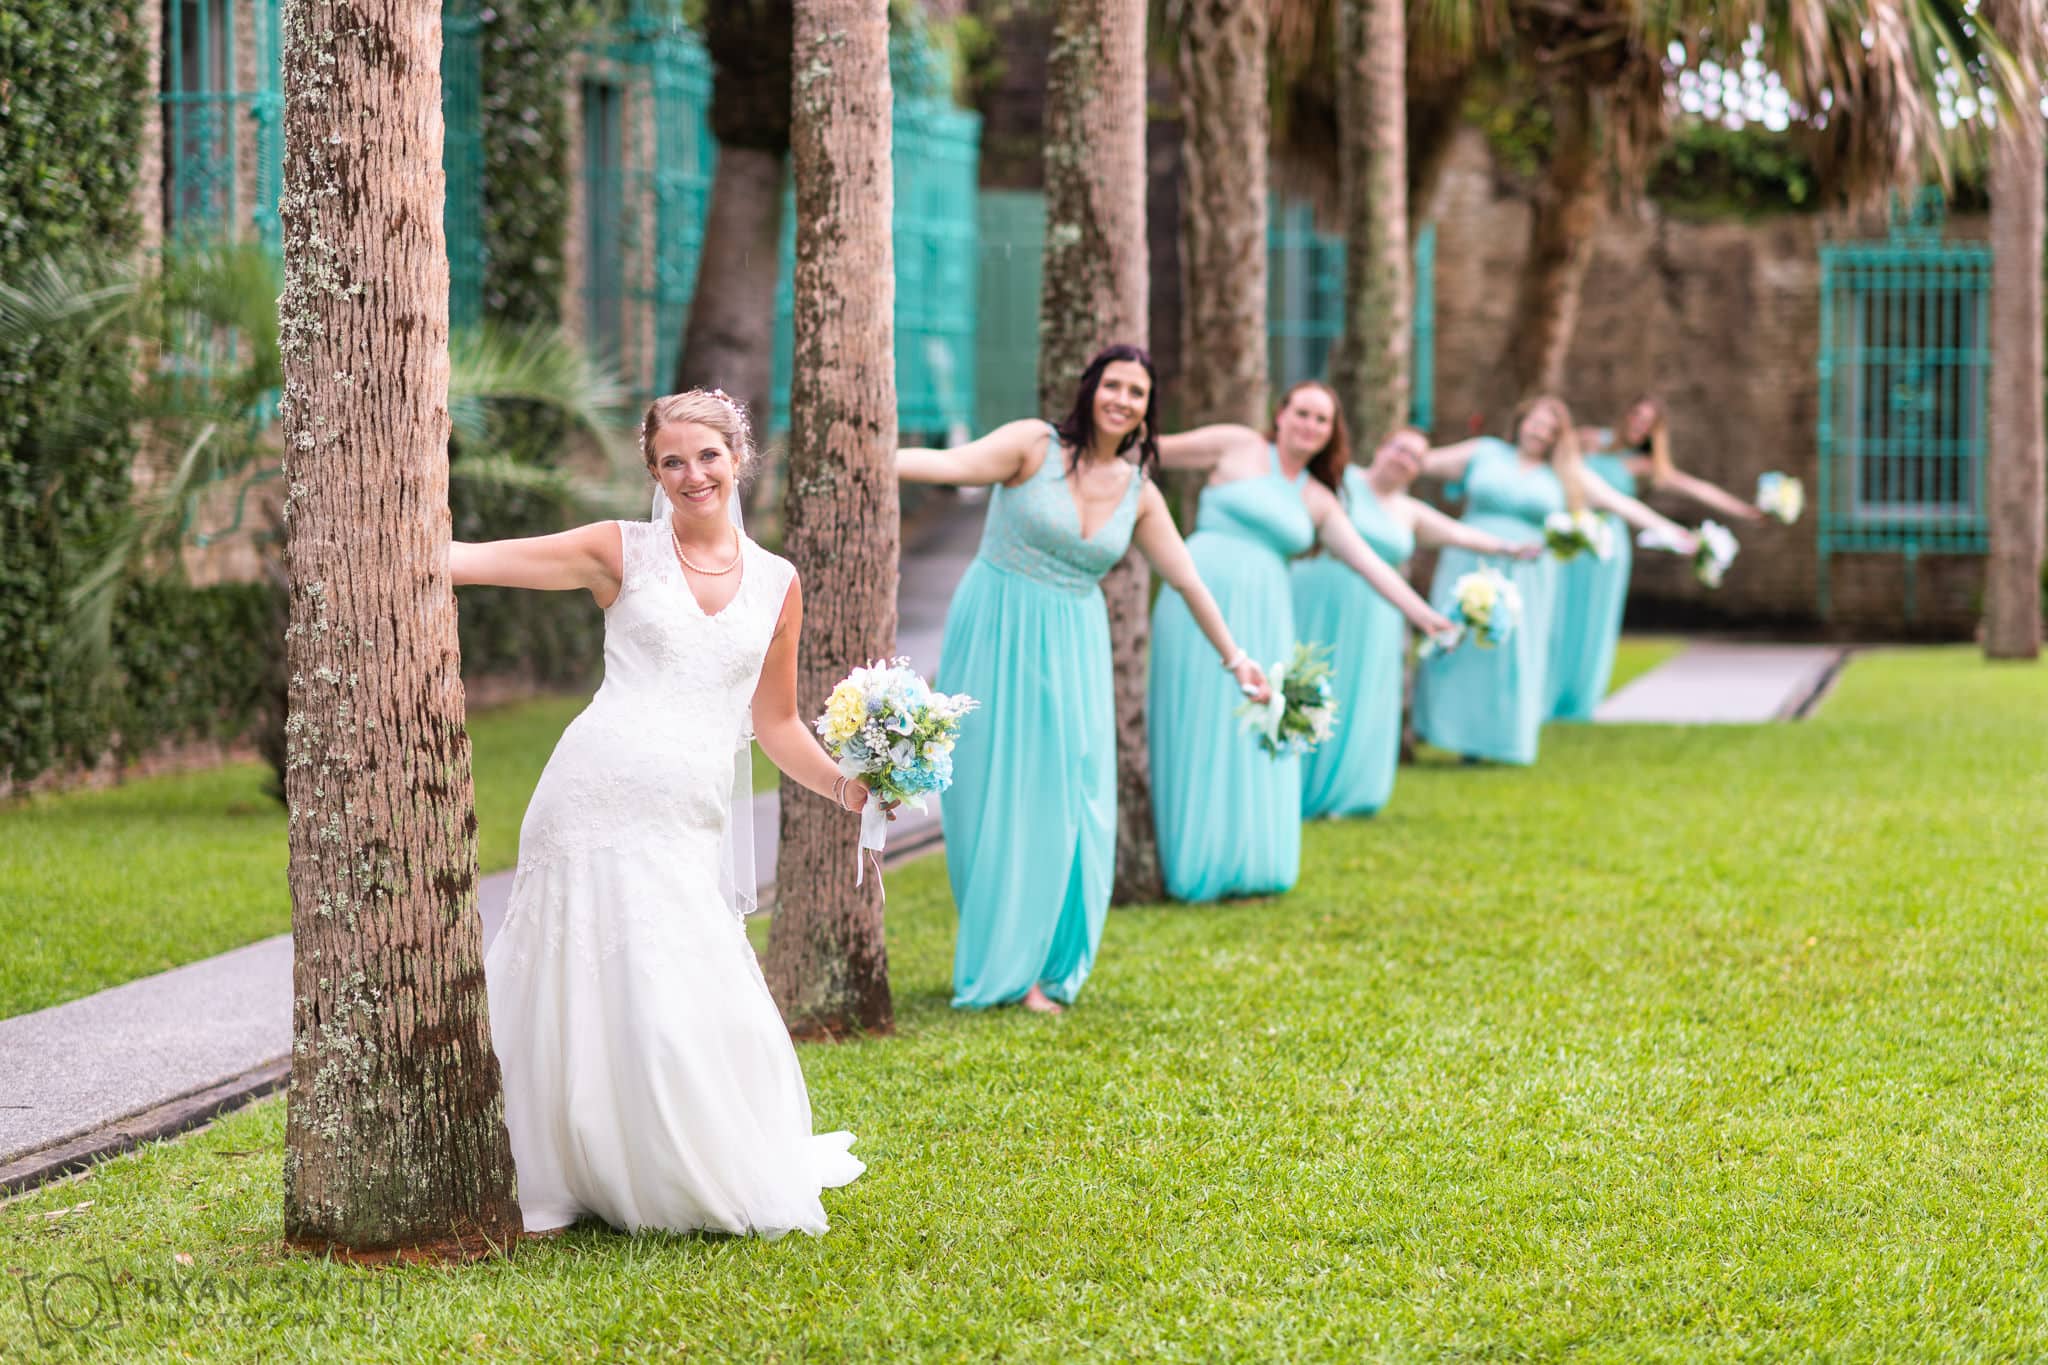 Fun picture with bridesmaids leaning out from behind the trees - Atalaya Castle - Huntington Beach State Park